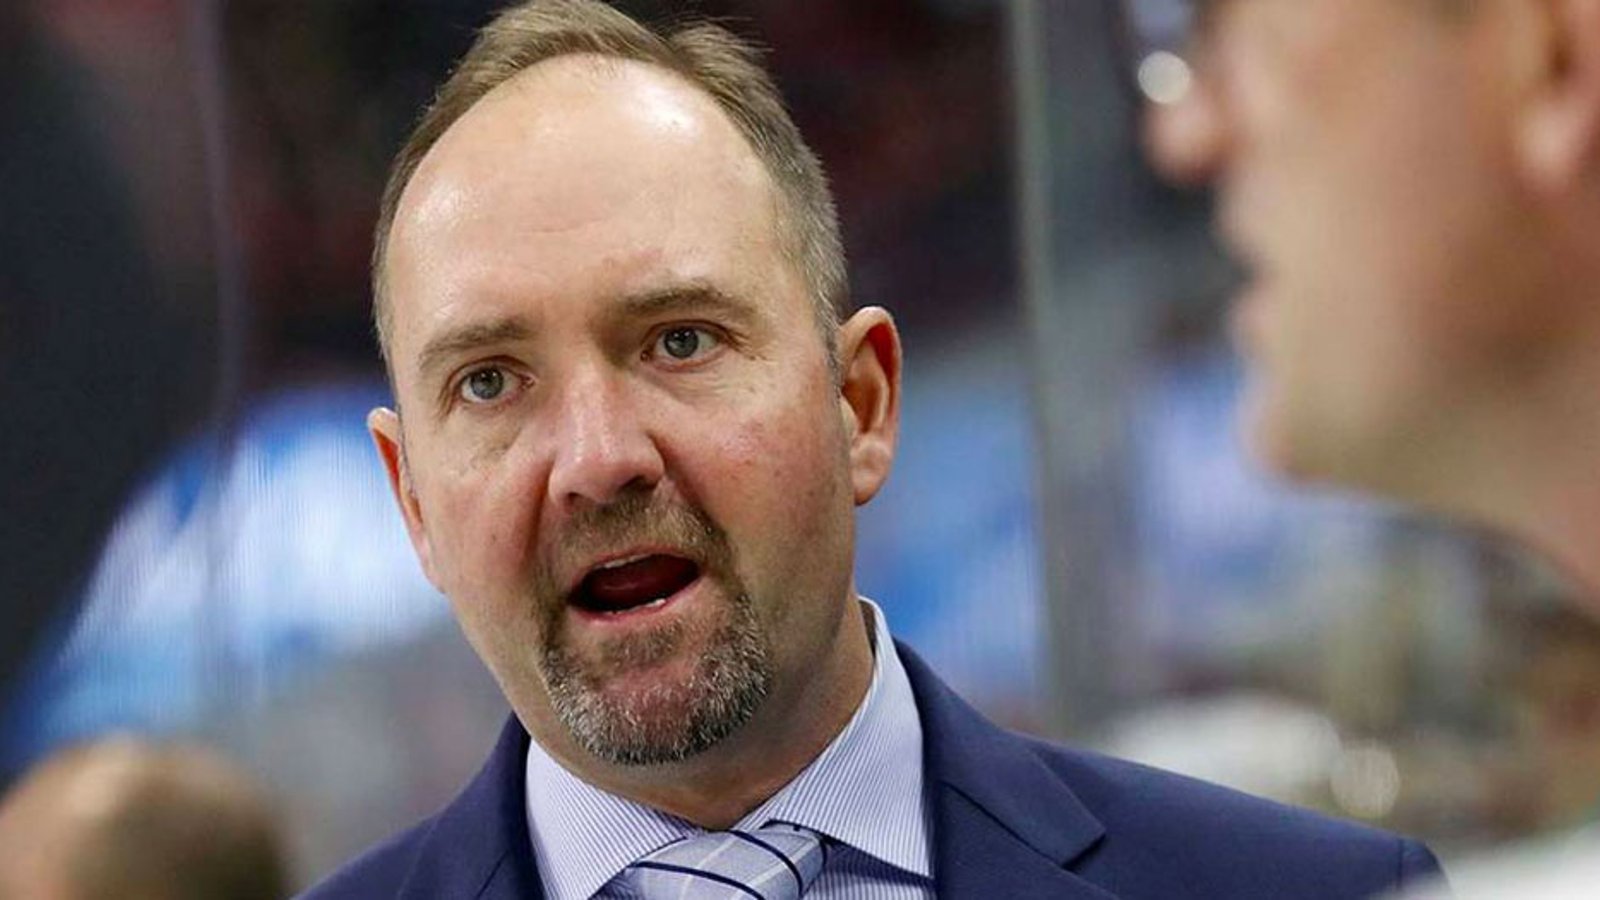 DeBoer turned down offer from rival team, chose Vegas instead